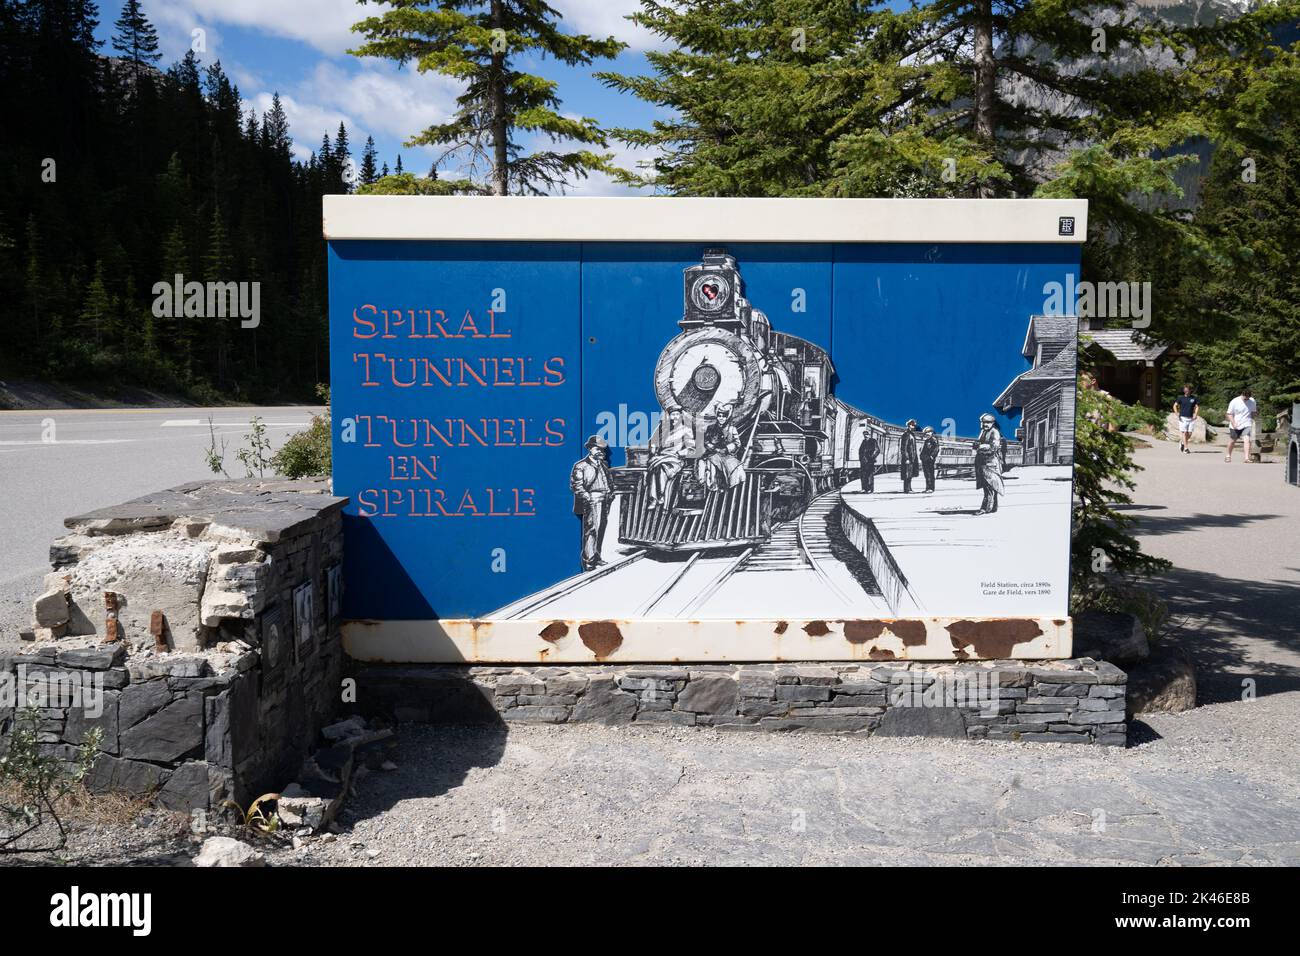 British Columbia, Canada - July 11, 2022: Sign for the Spiral Tunnels, an important Canadian Pacific Railway train pass through Kicking Horse Pass bet Stock Photo